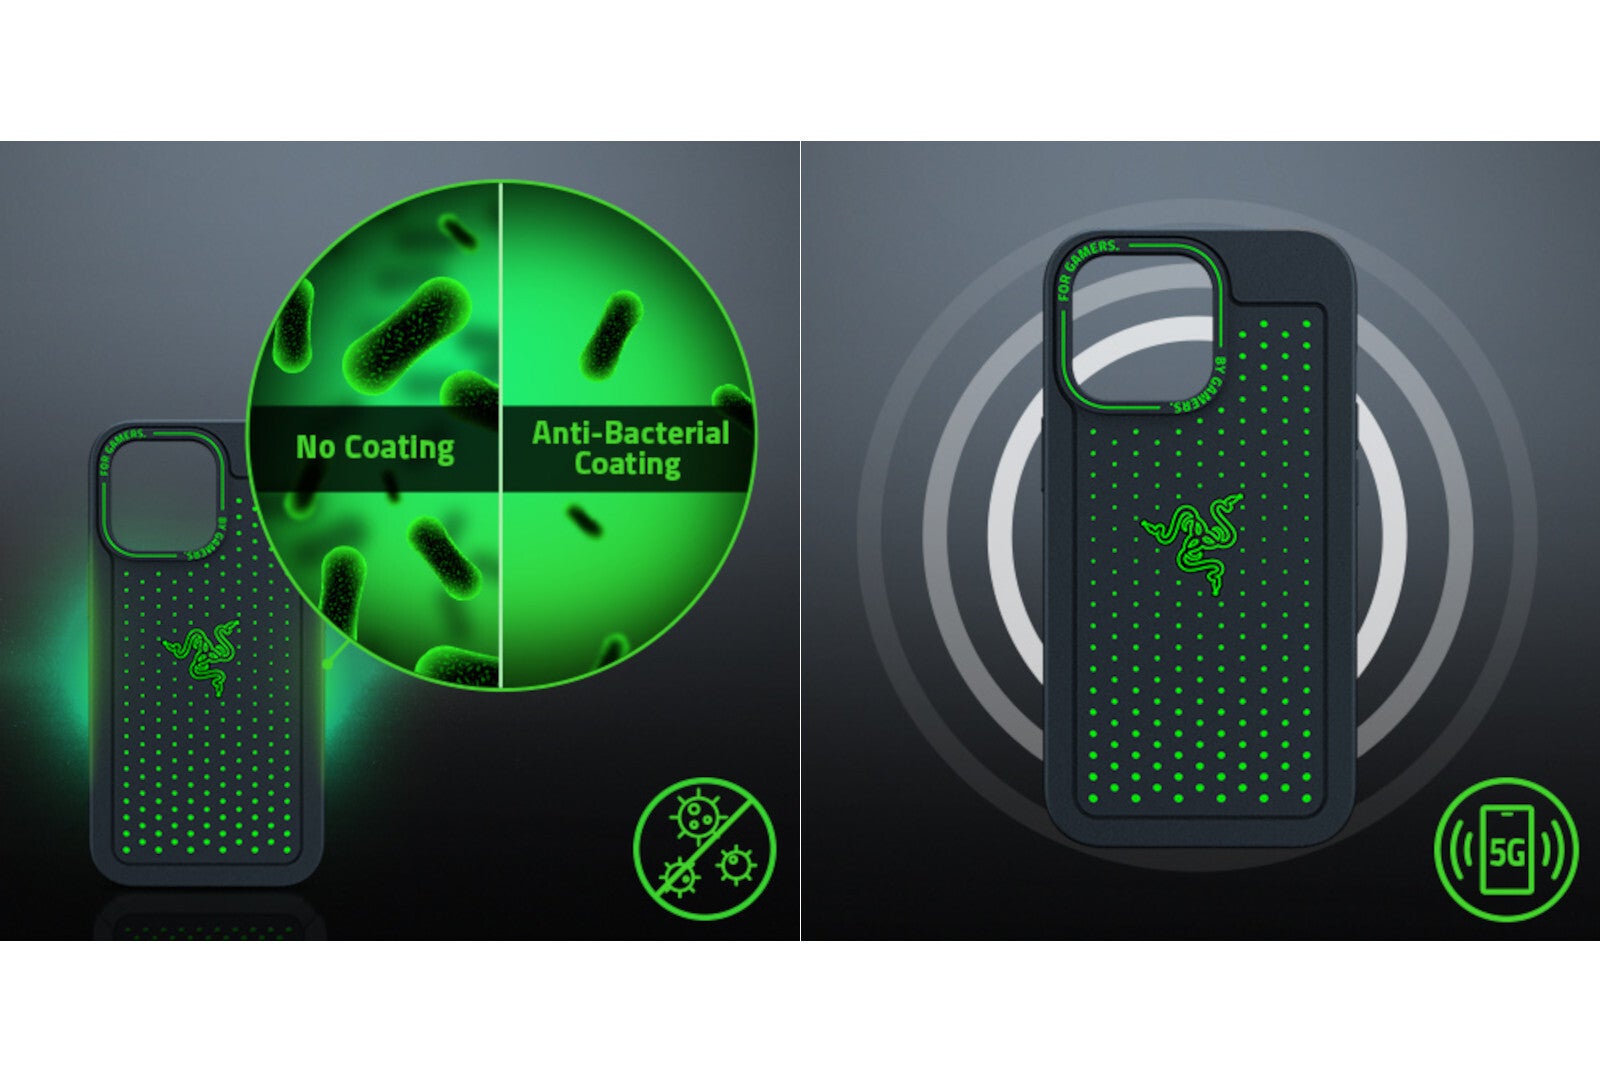 Razer's new iPhone 13 Arctech case can cool your phone